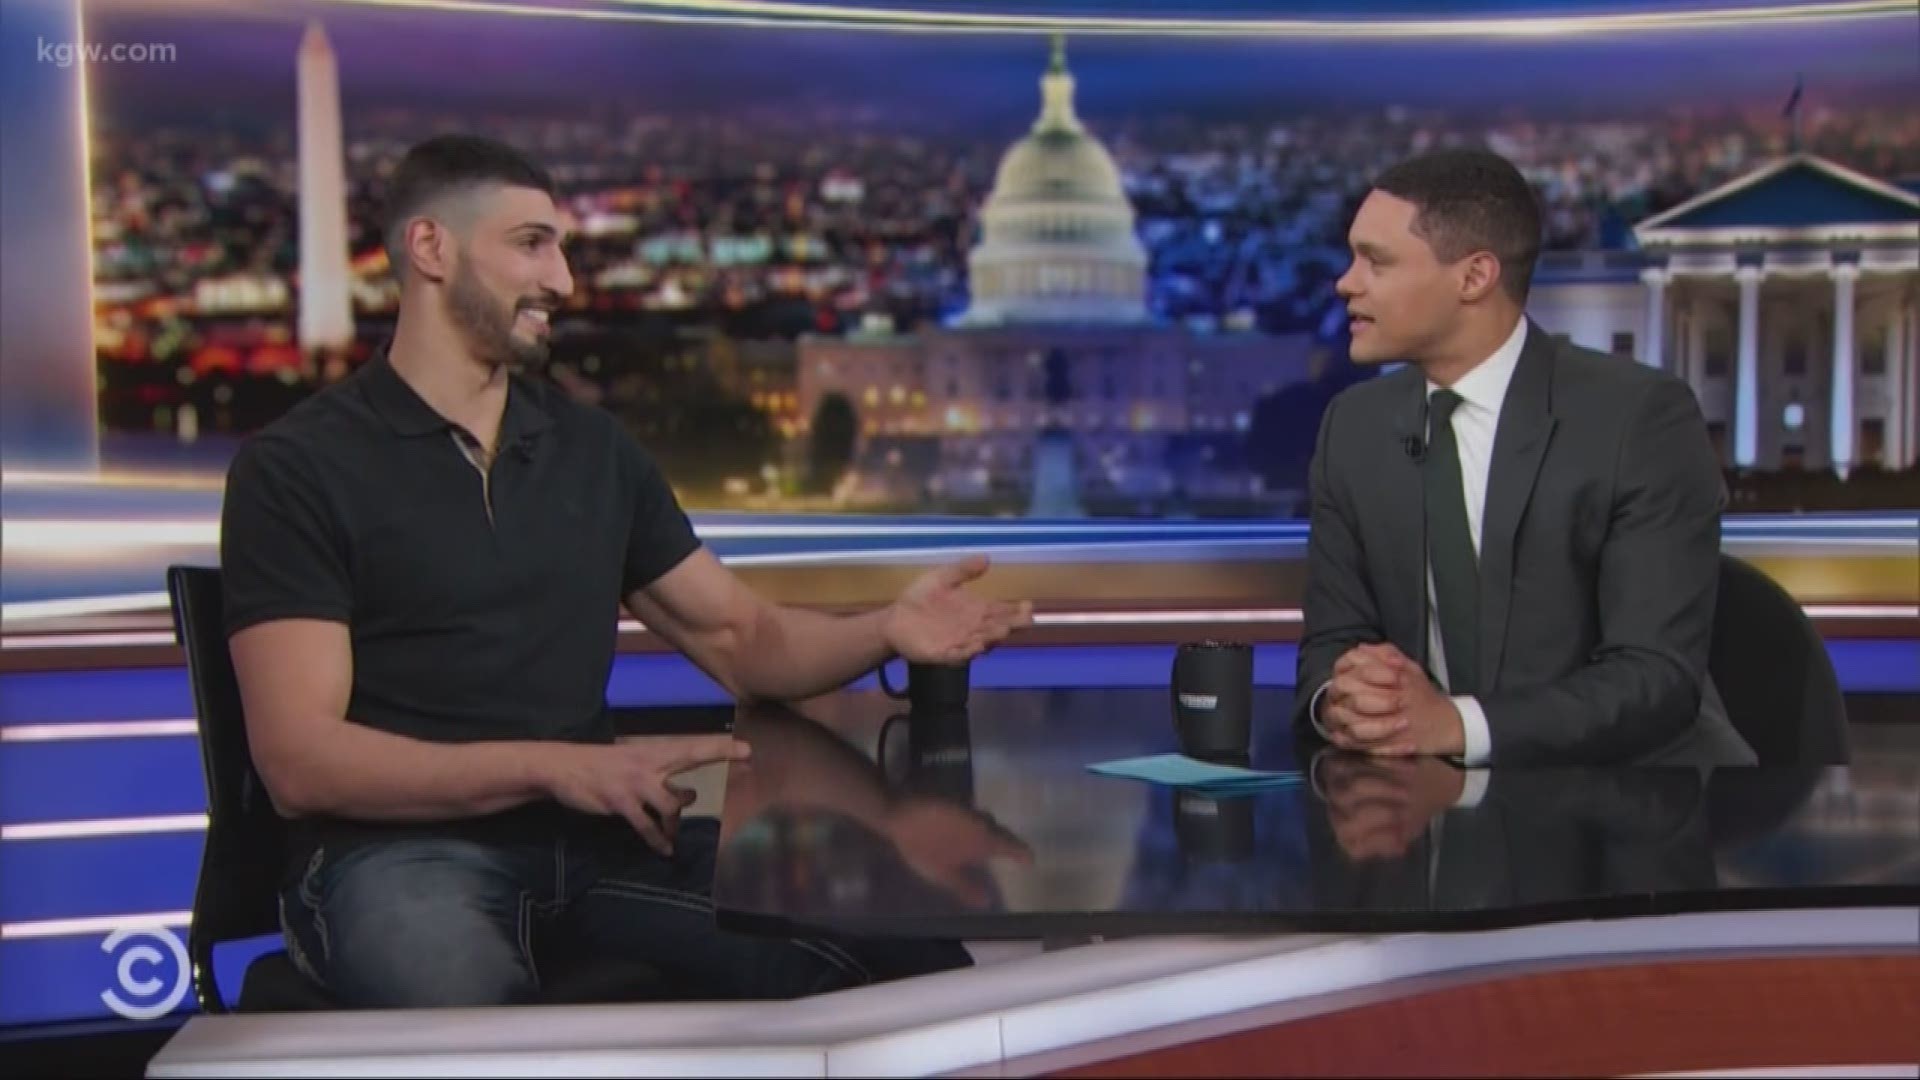 Enes Kanter is a guest on Comedy Central's 'The Daily Show' with Trevor Noah